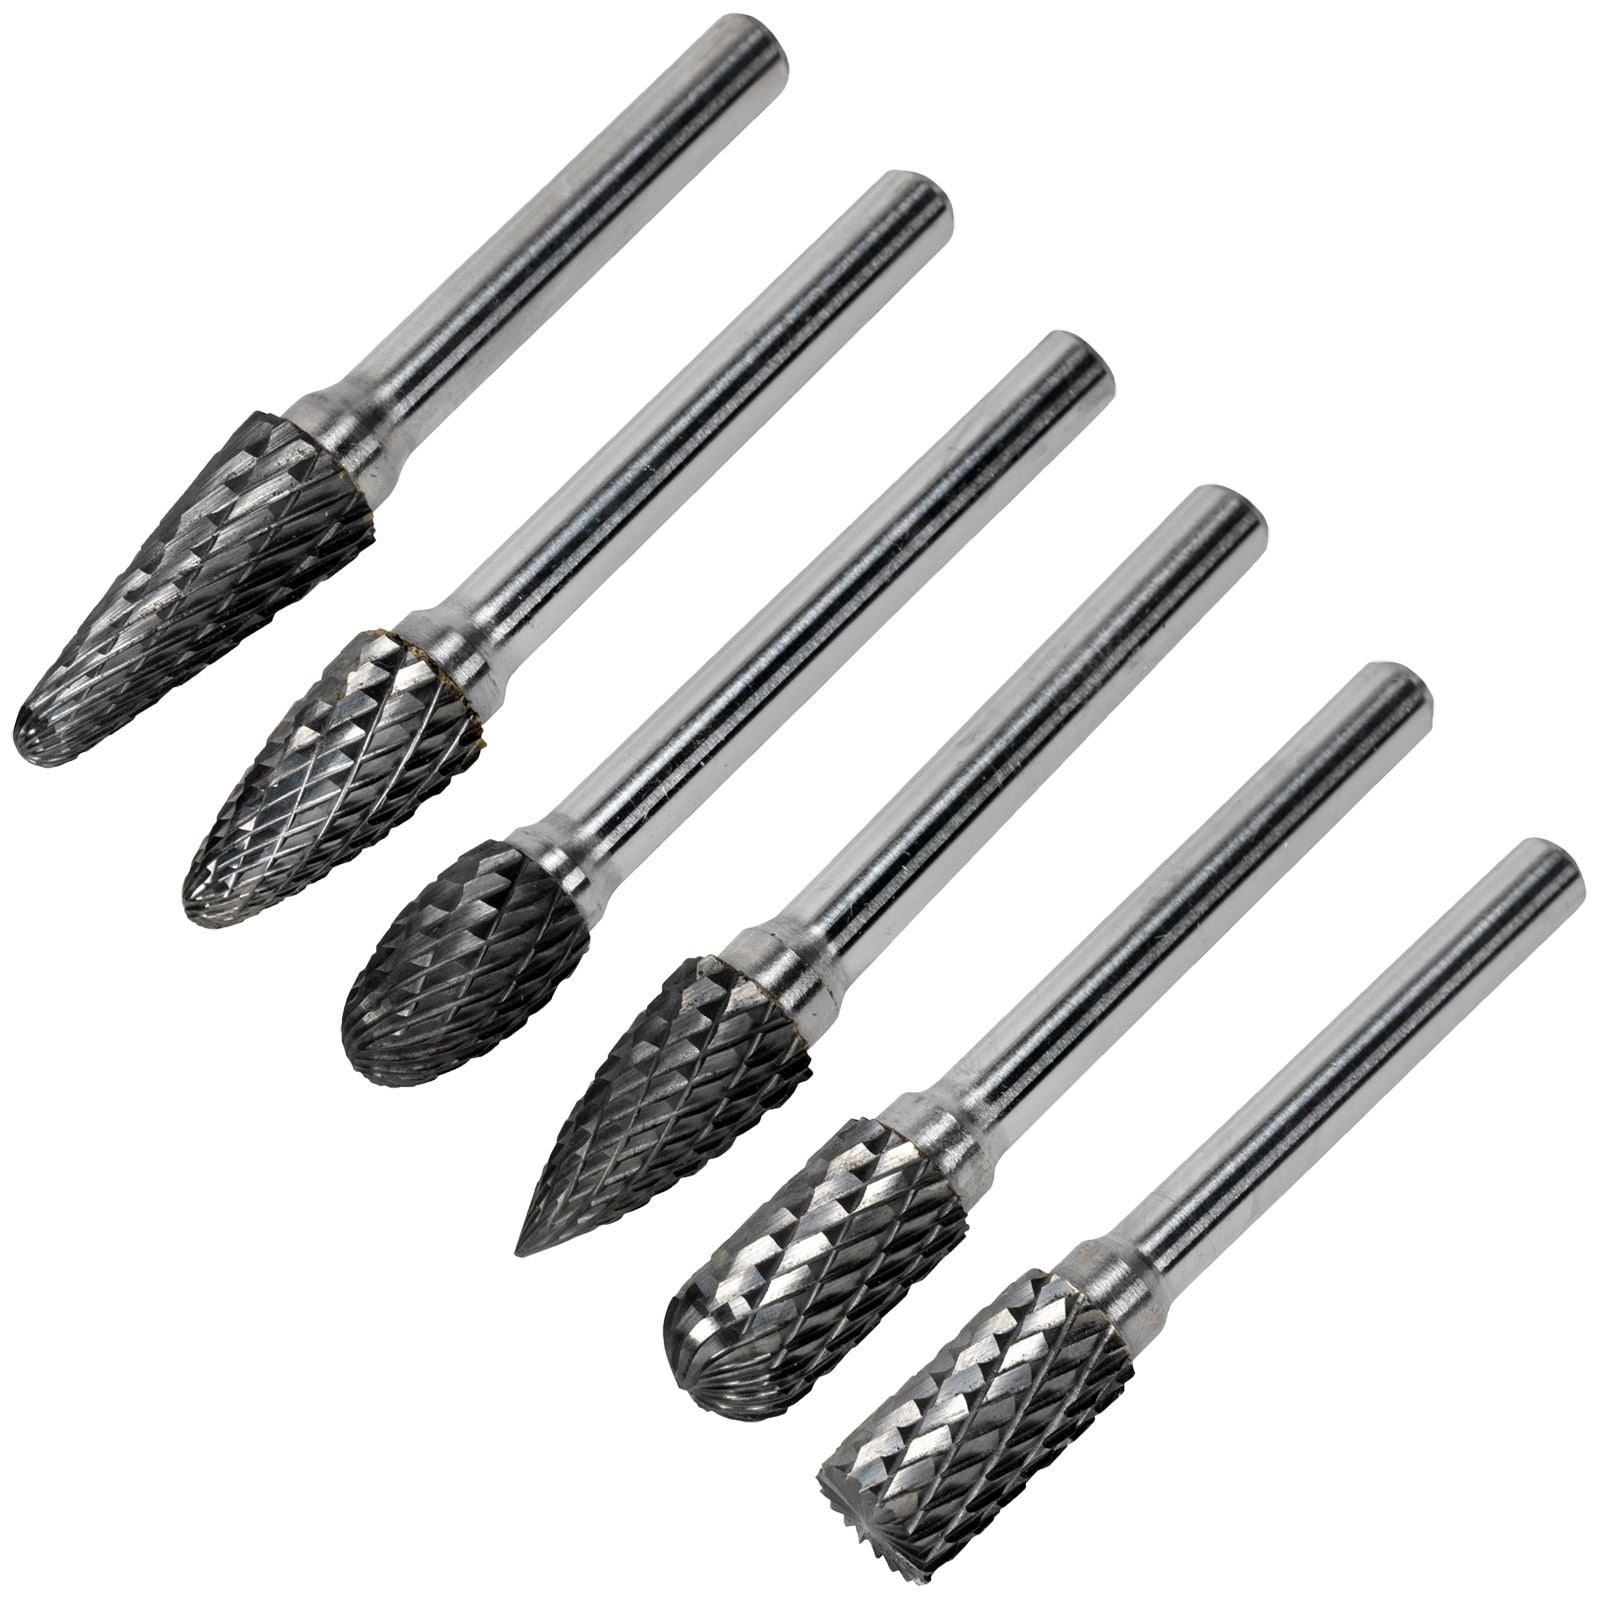 Sealey Tungsten Carbide Rotary Burrs 6mm Shank